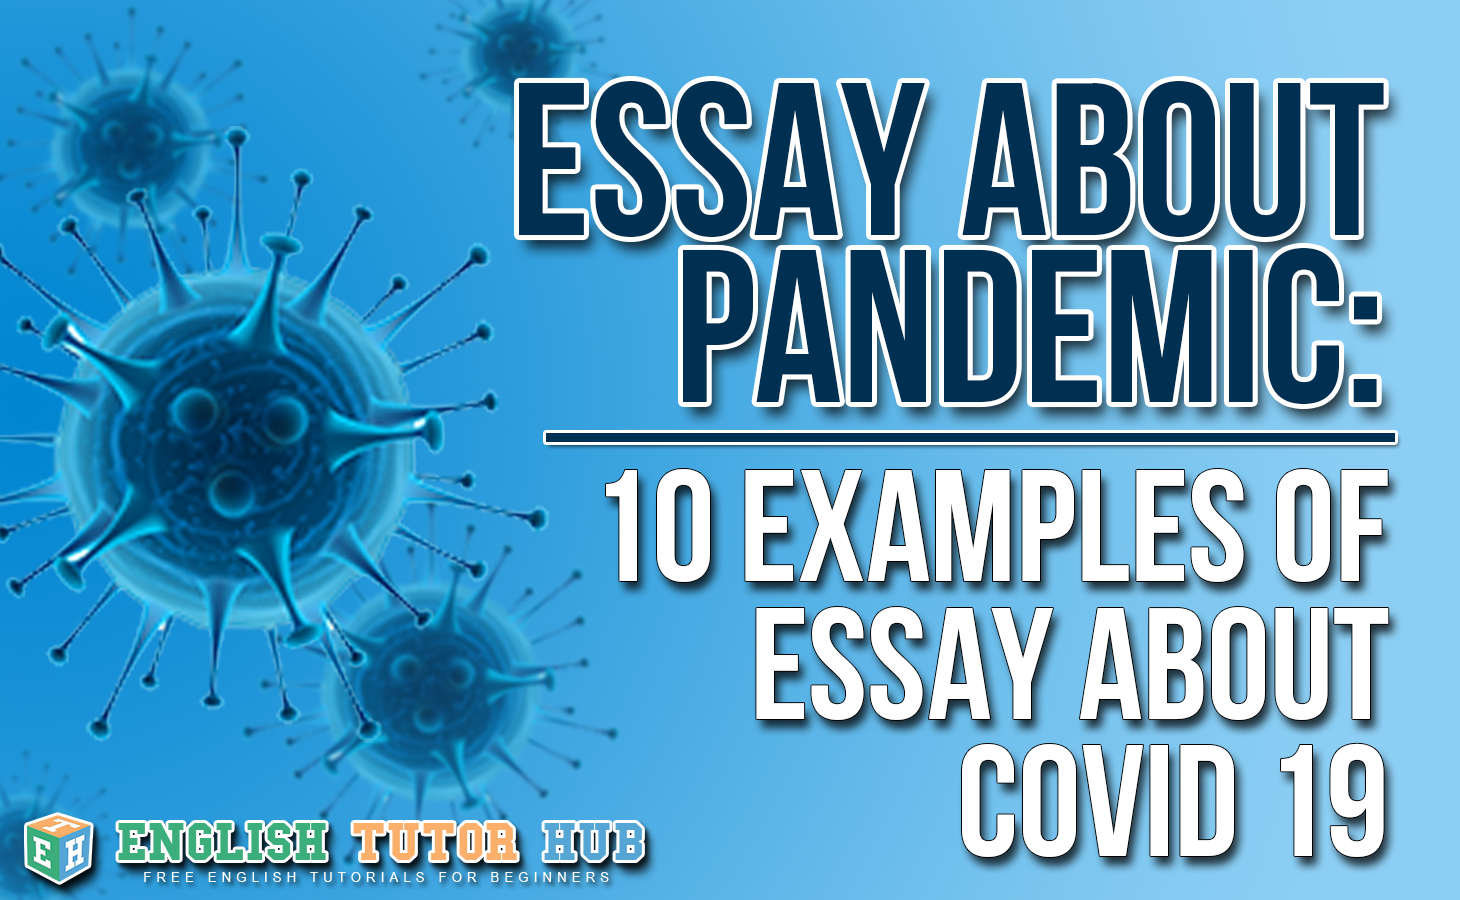 ESSAY ABOUT PANDEMIC - 10 EXAMPLES OF ESSAY ABOUT COVID 19